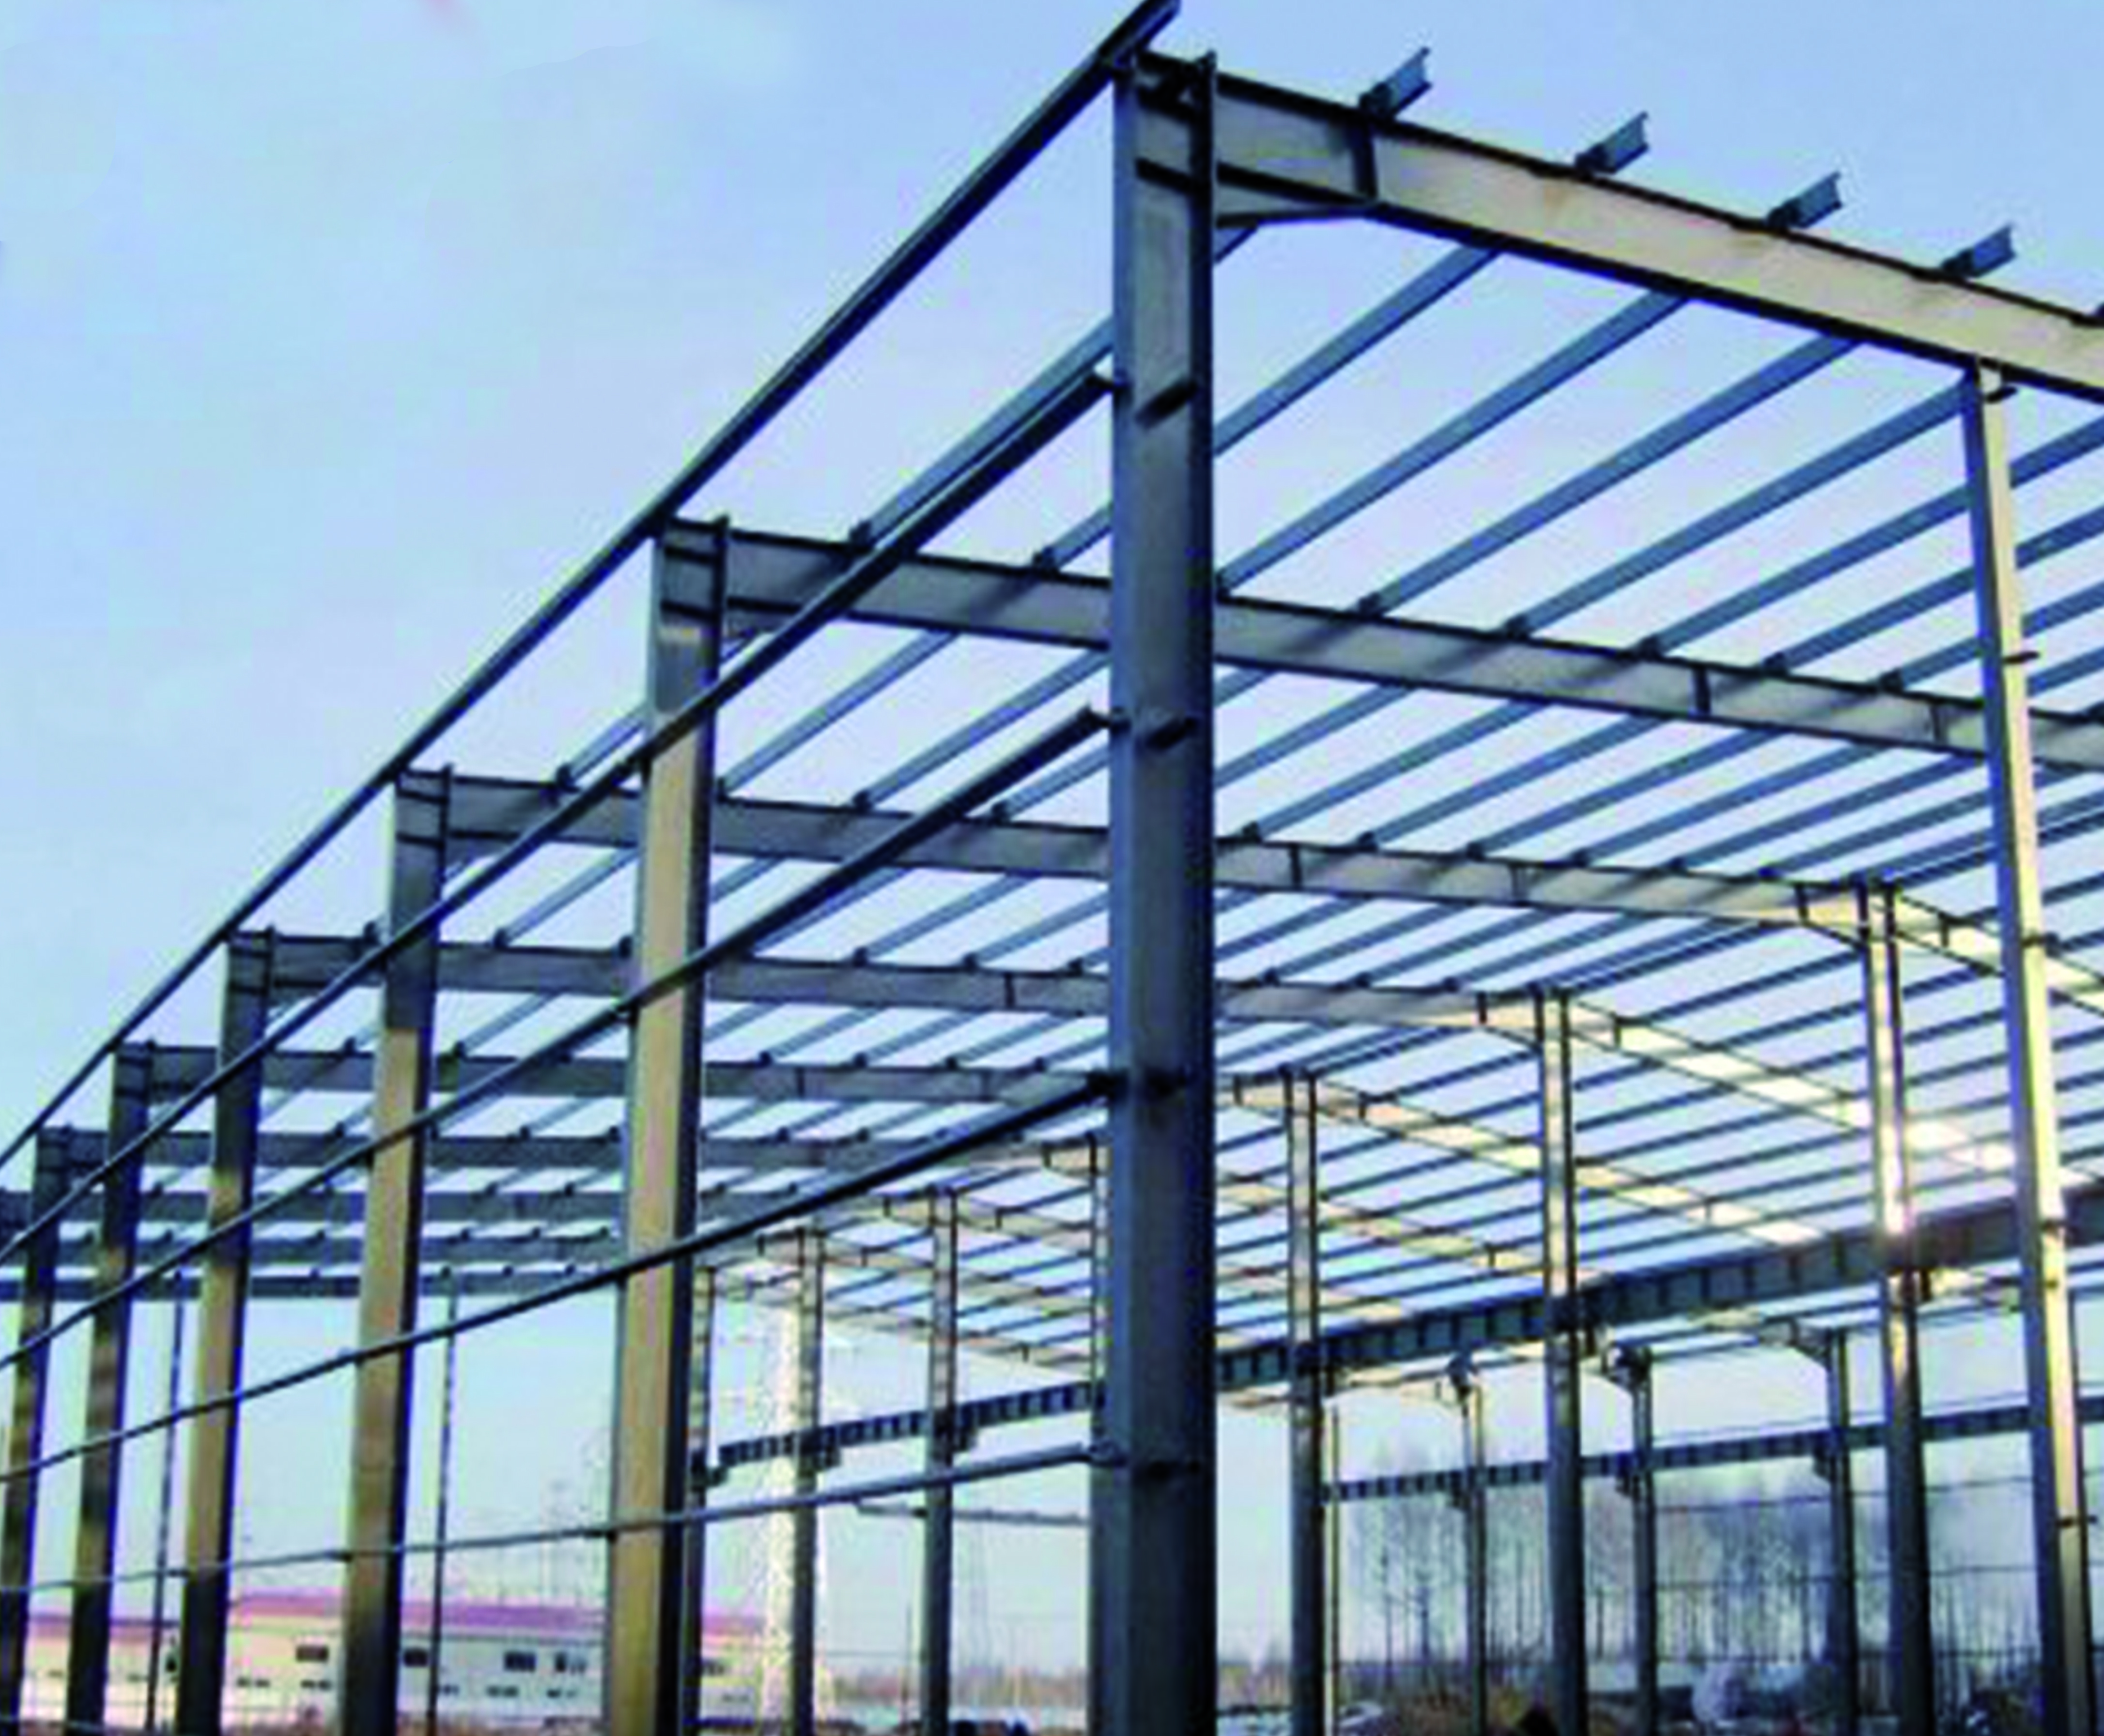 Designing & Manufacturing Steel Structures